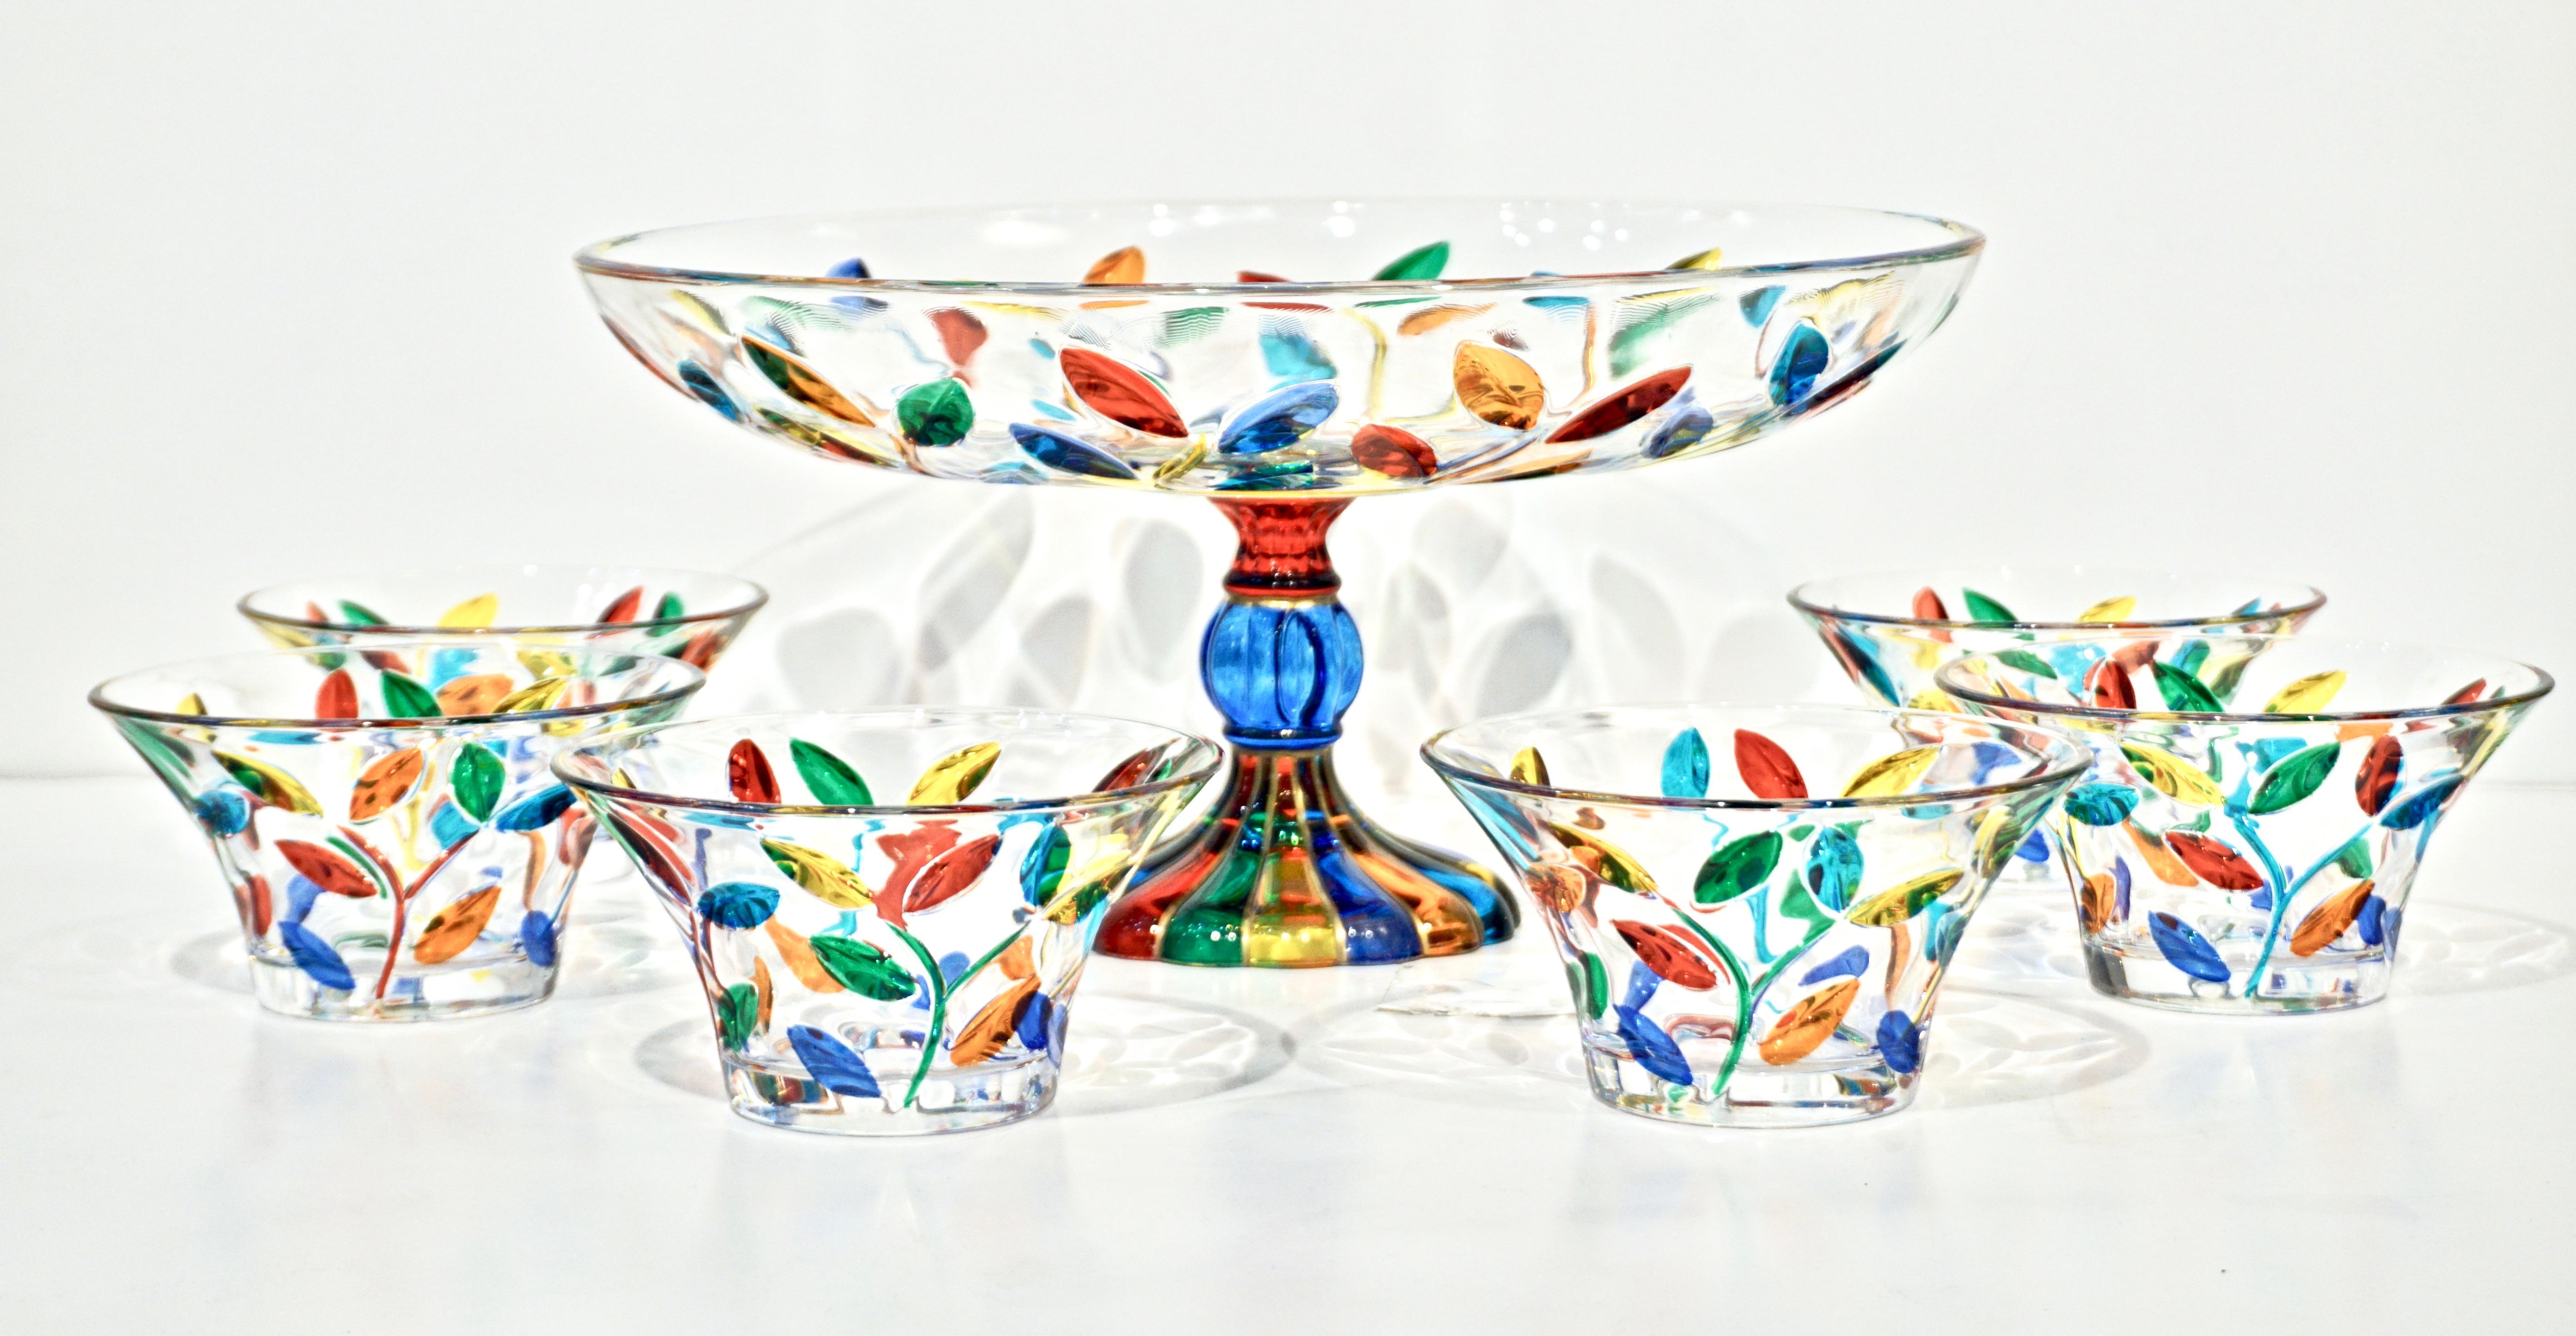 Hand-Crafted Colleoni Modern Crystal Murano Glass Compote Dish / Tazza with Colorful Leaves